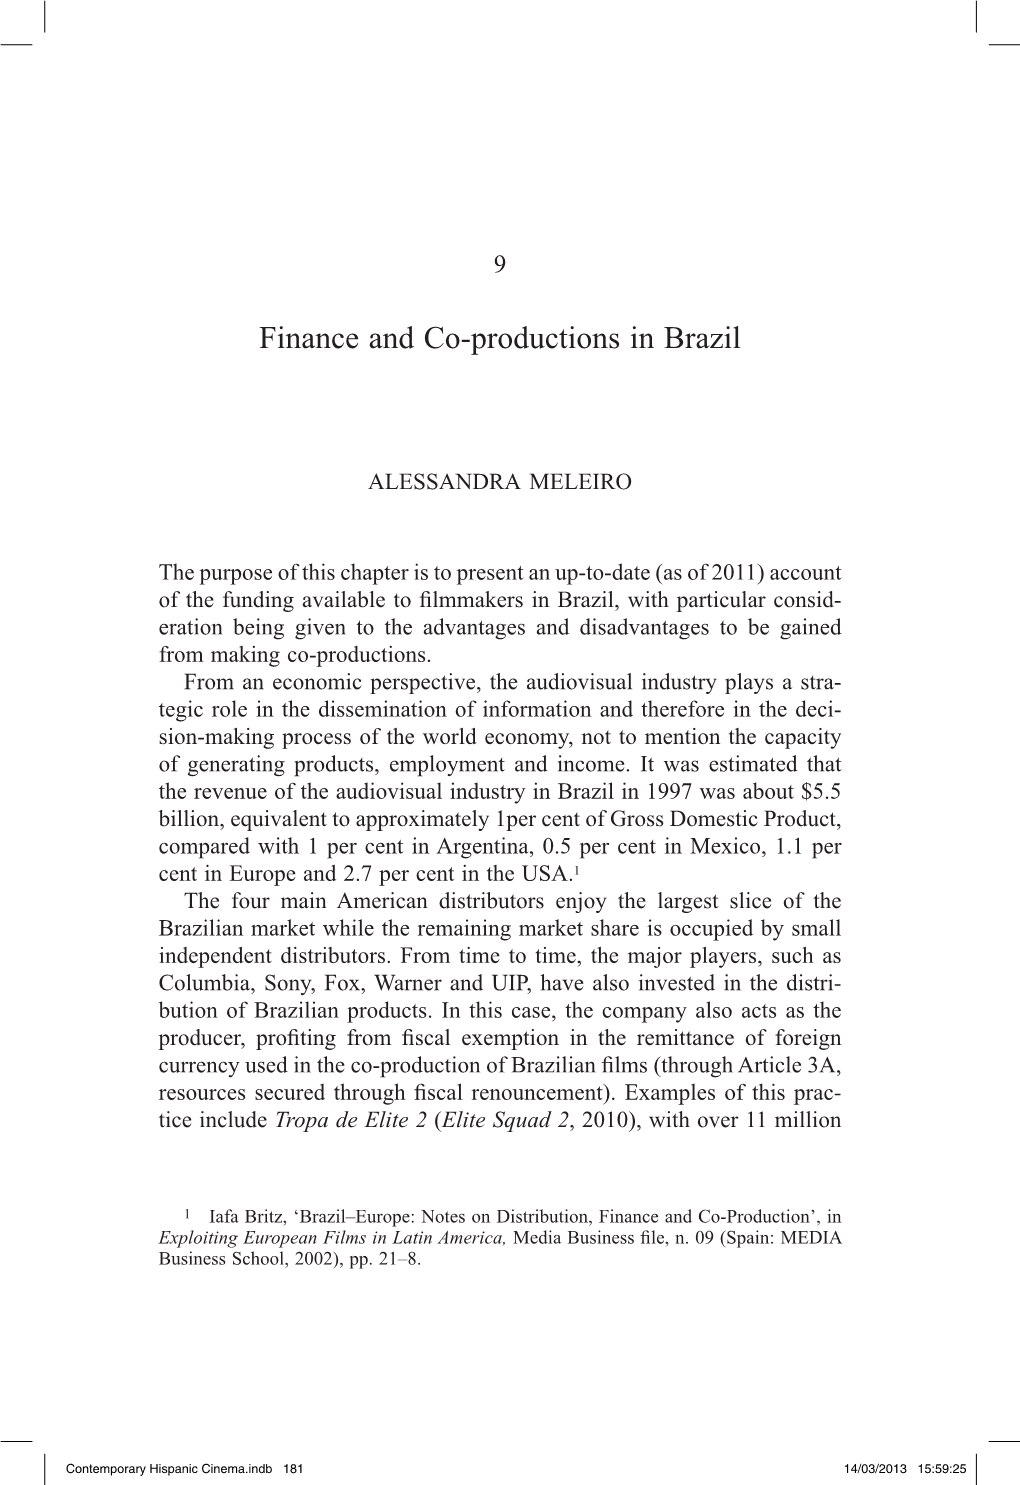 Finance and Co-Productions in Brazil